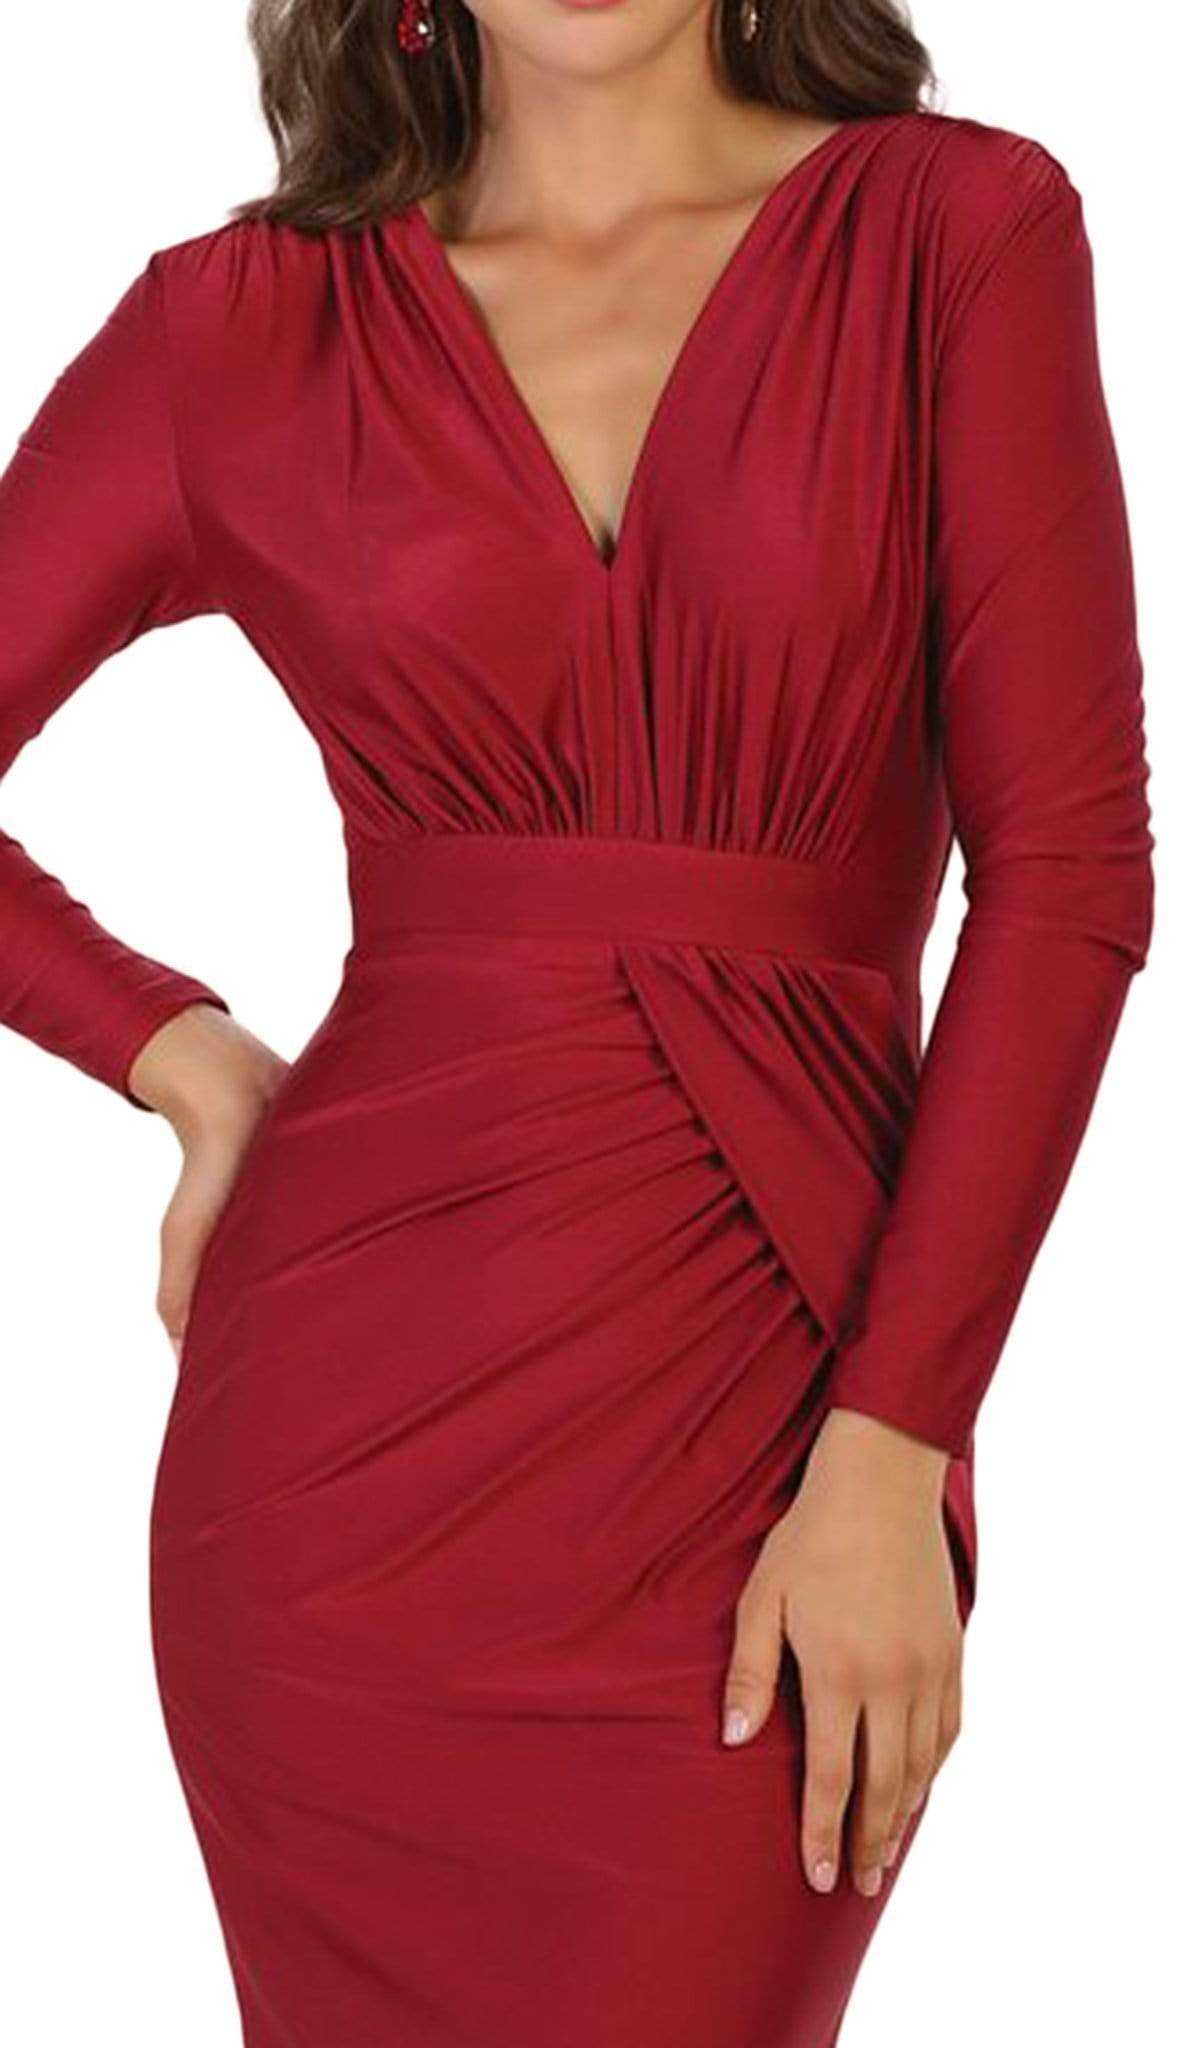 May Queen, May Queen - Ruched Deep V-neck Sheath Evening Dress MQ1530